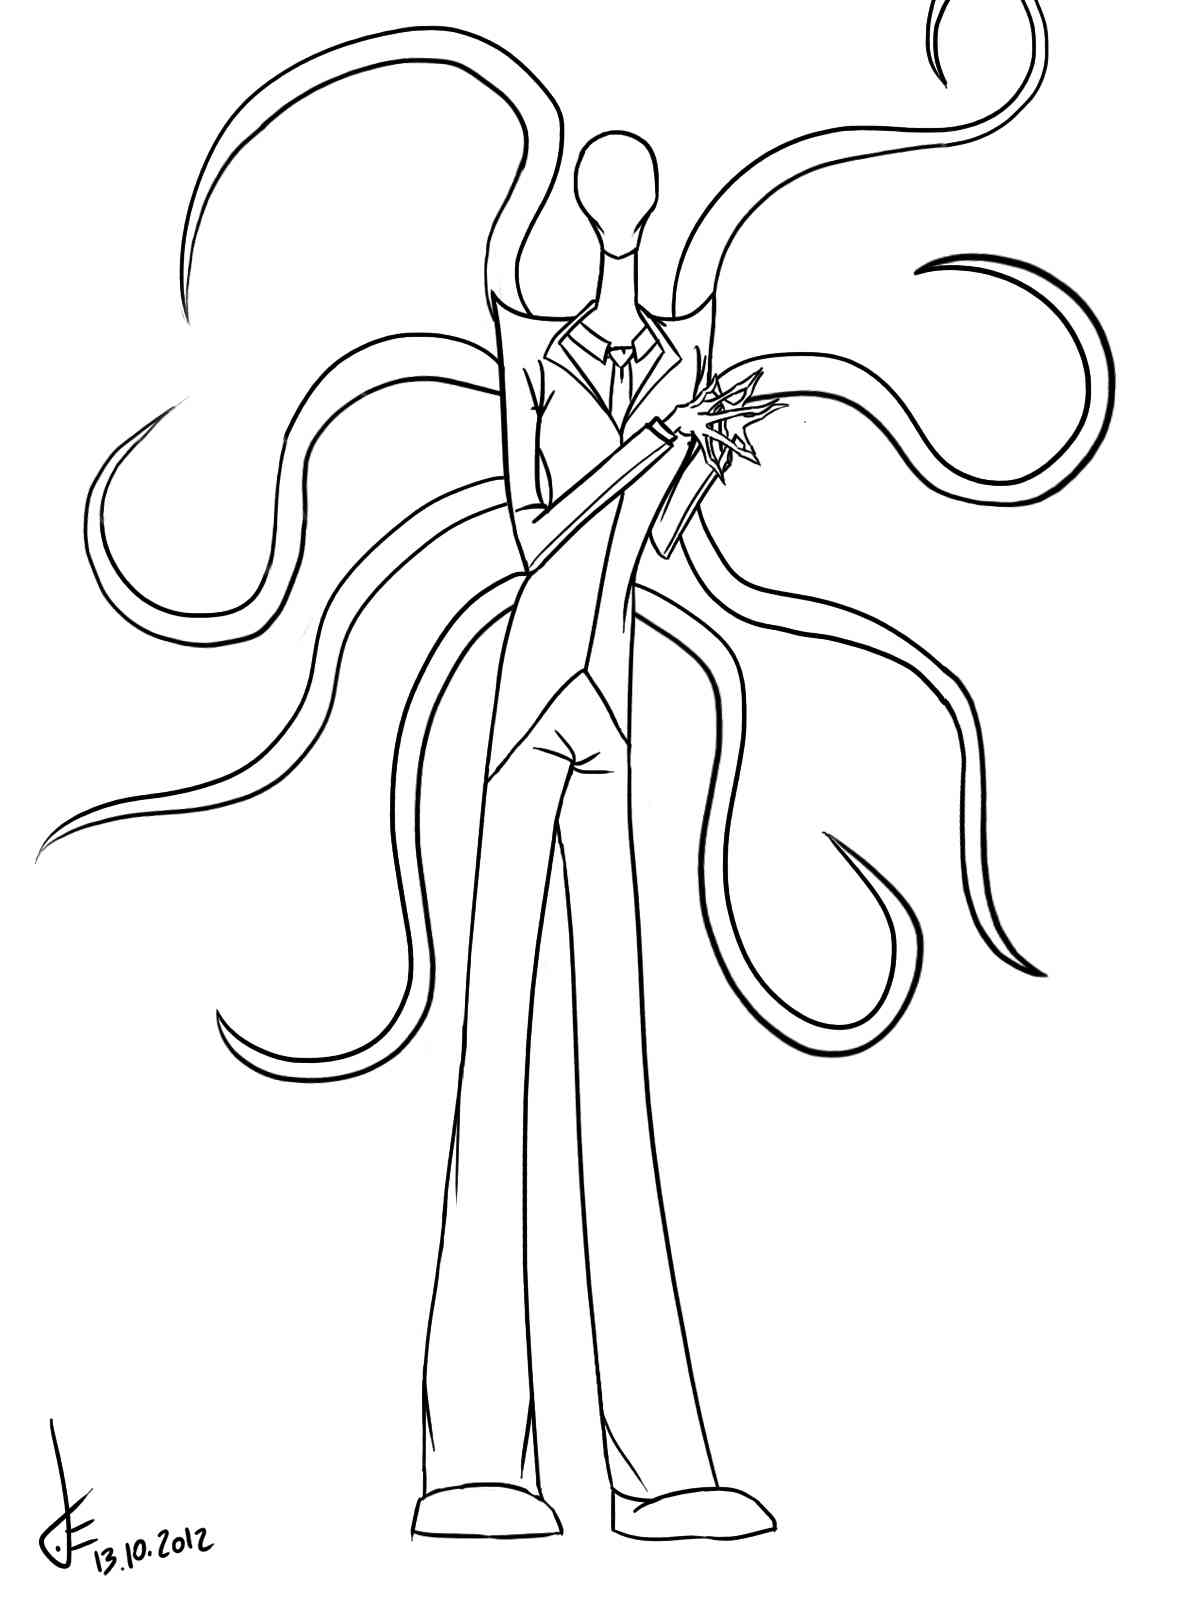 Slender Man coloring pages. Download and print Slender Man coloring pages.